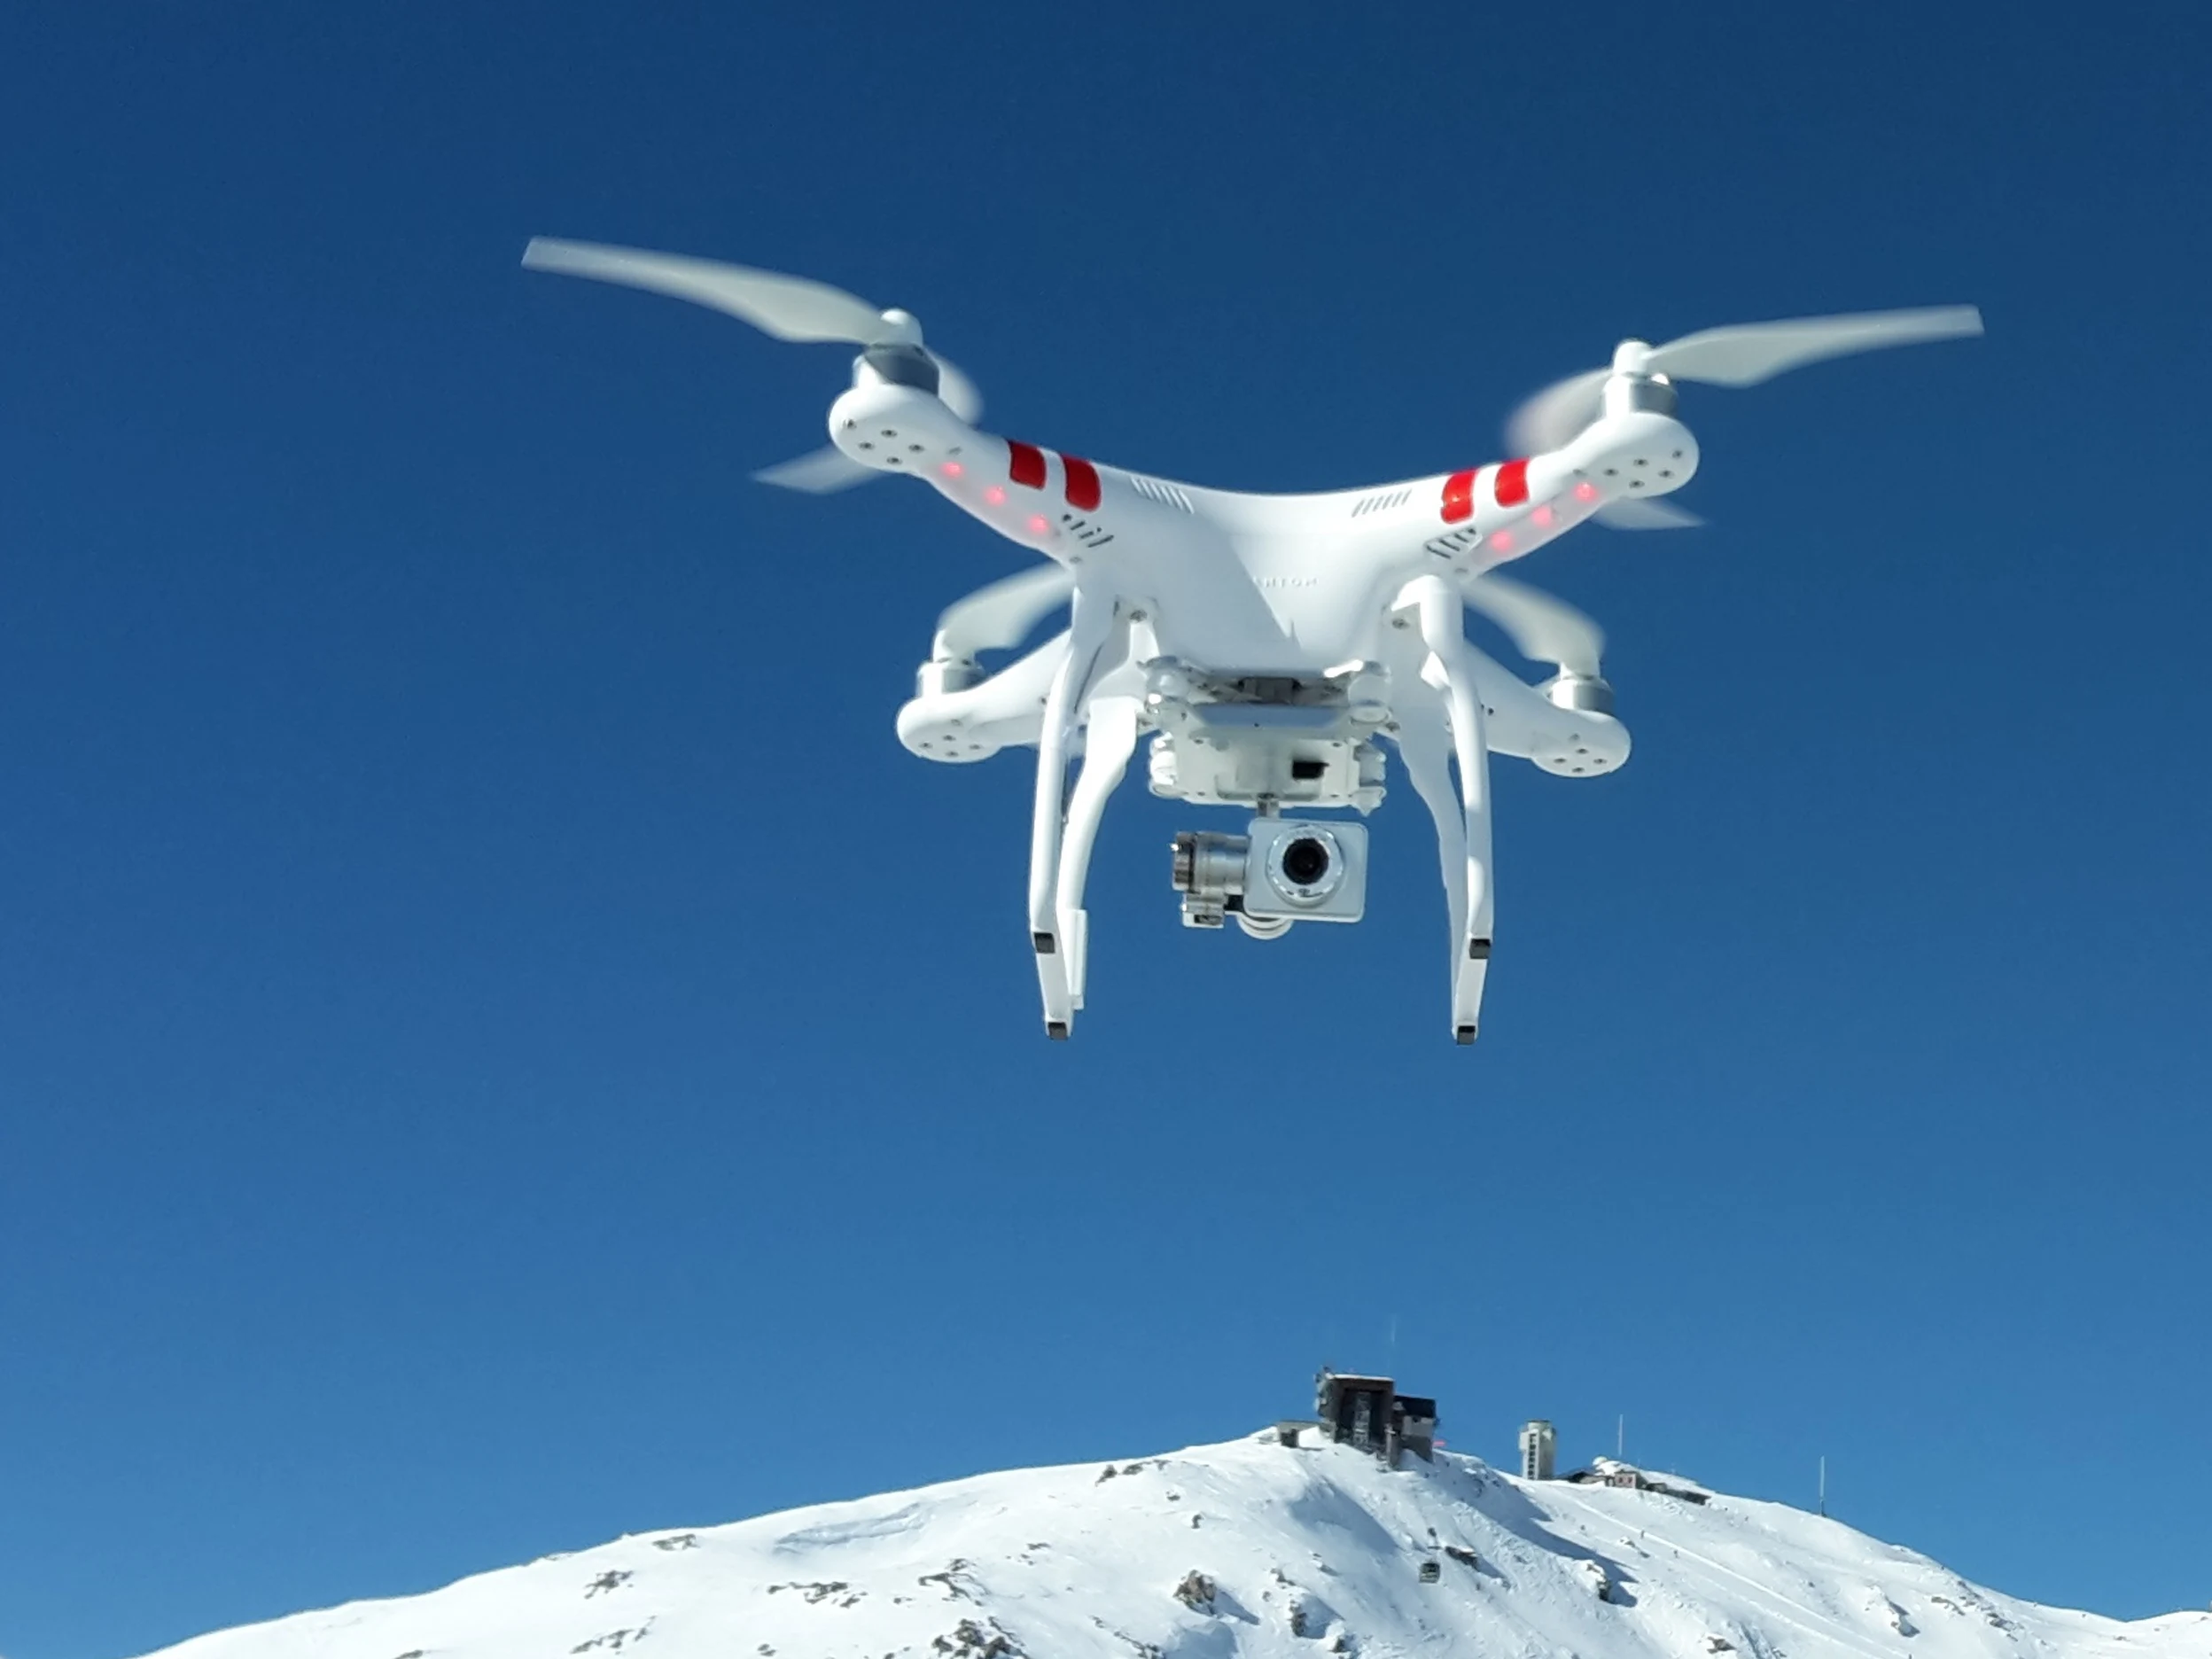 A white drone hovers over a snow covered mountain landscape